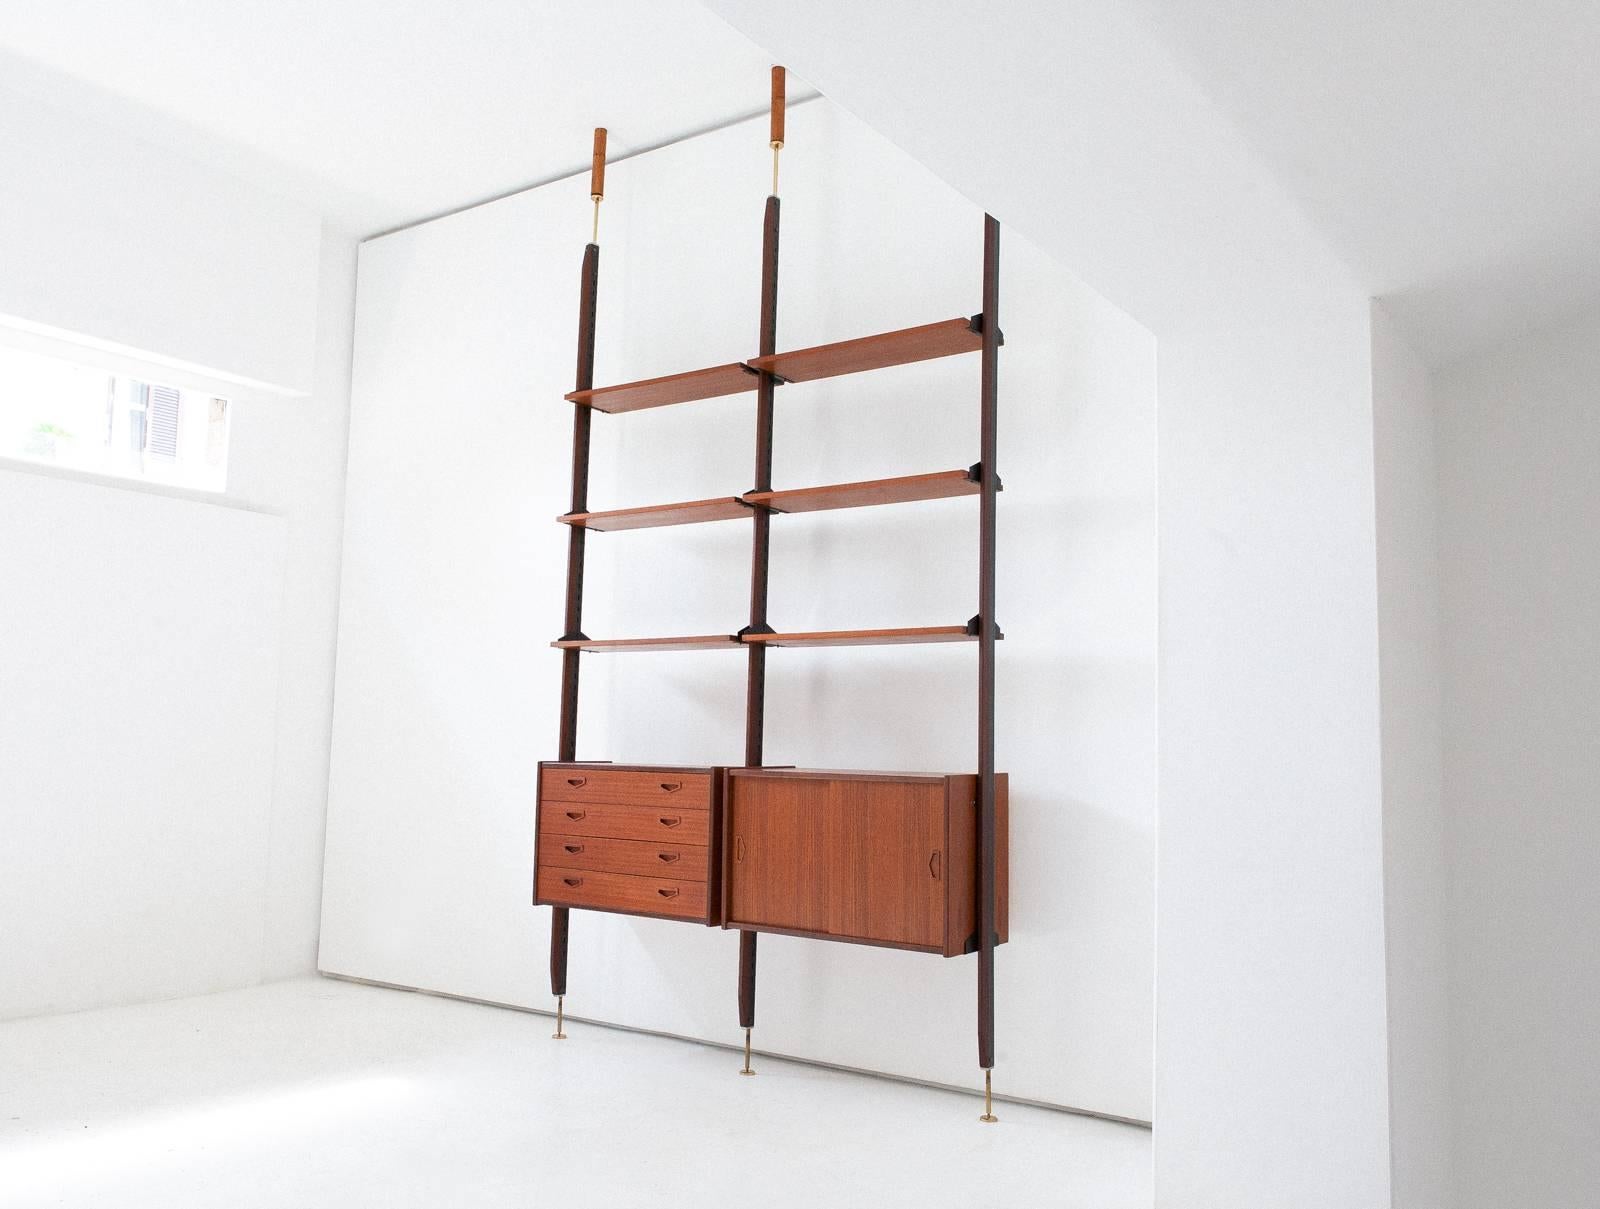 Bookshelf / modular wall unit
Italian design, 1950s 
Teak, iron, brass 

Completely restored 

The height is adjustable, just specify your ceiling height for a confirmation 
The wooden support to the ceiling is just for the pictures 

 

